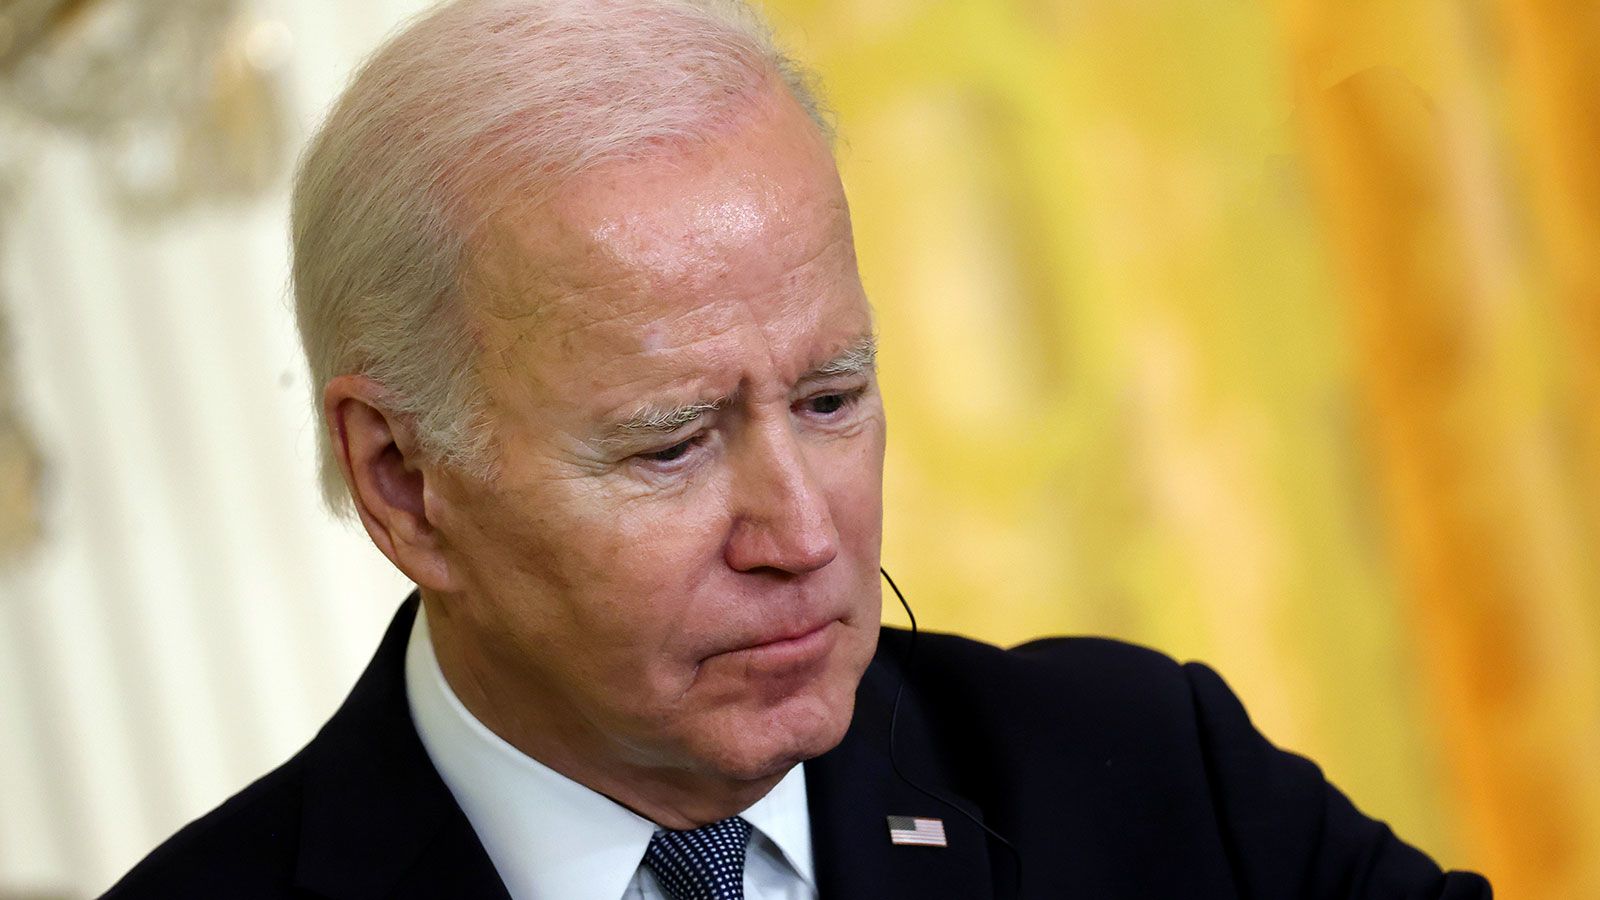 Biden campaigned the federal death penalty. But 2 years in, advocates see an 'inconsistent' message | CNN Politics